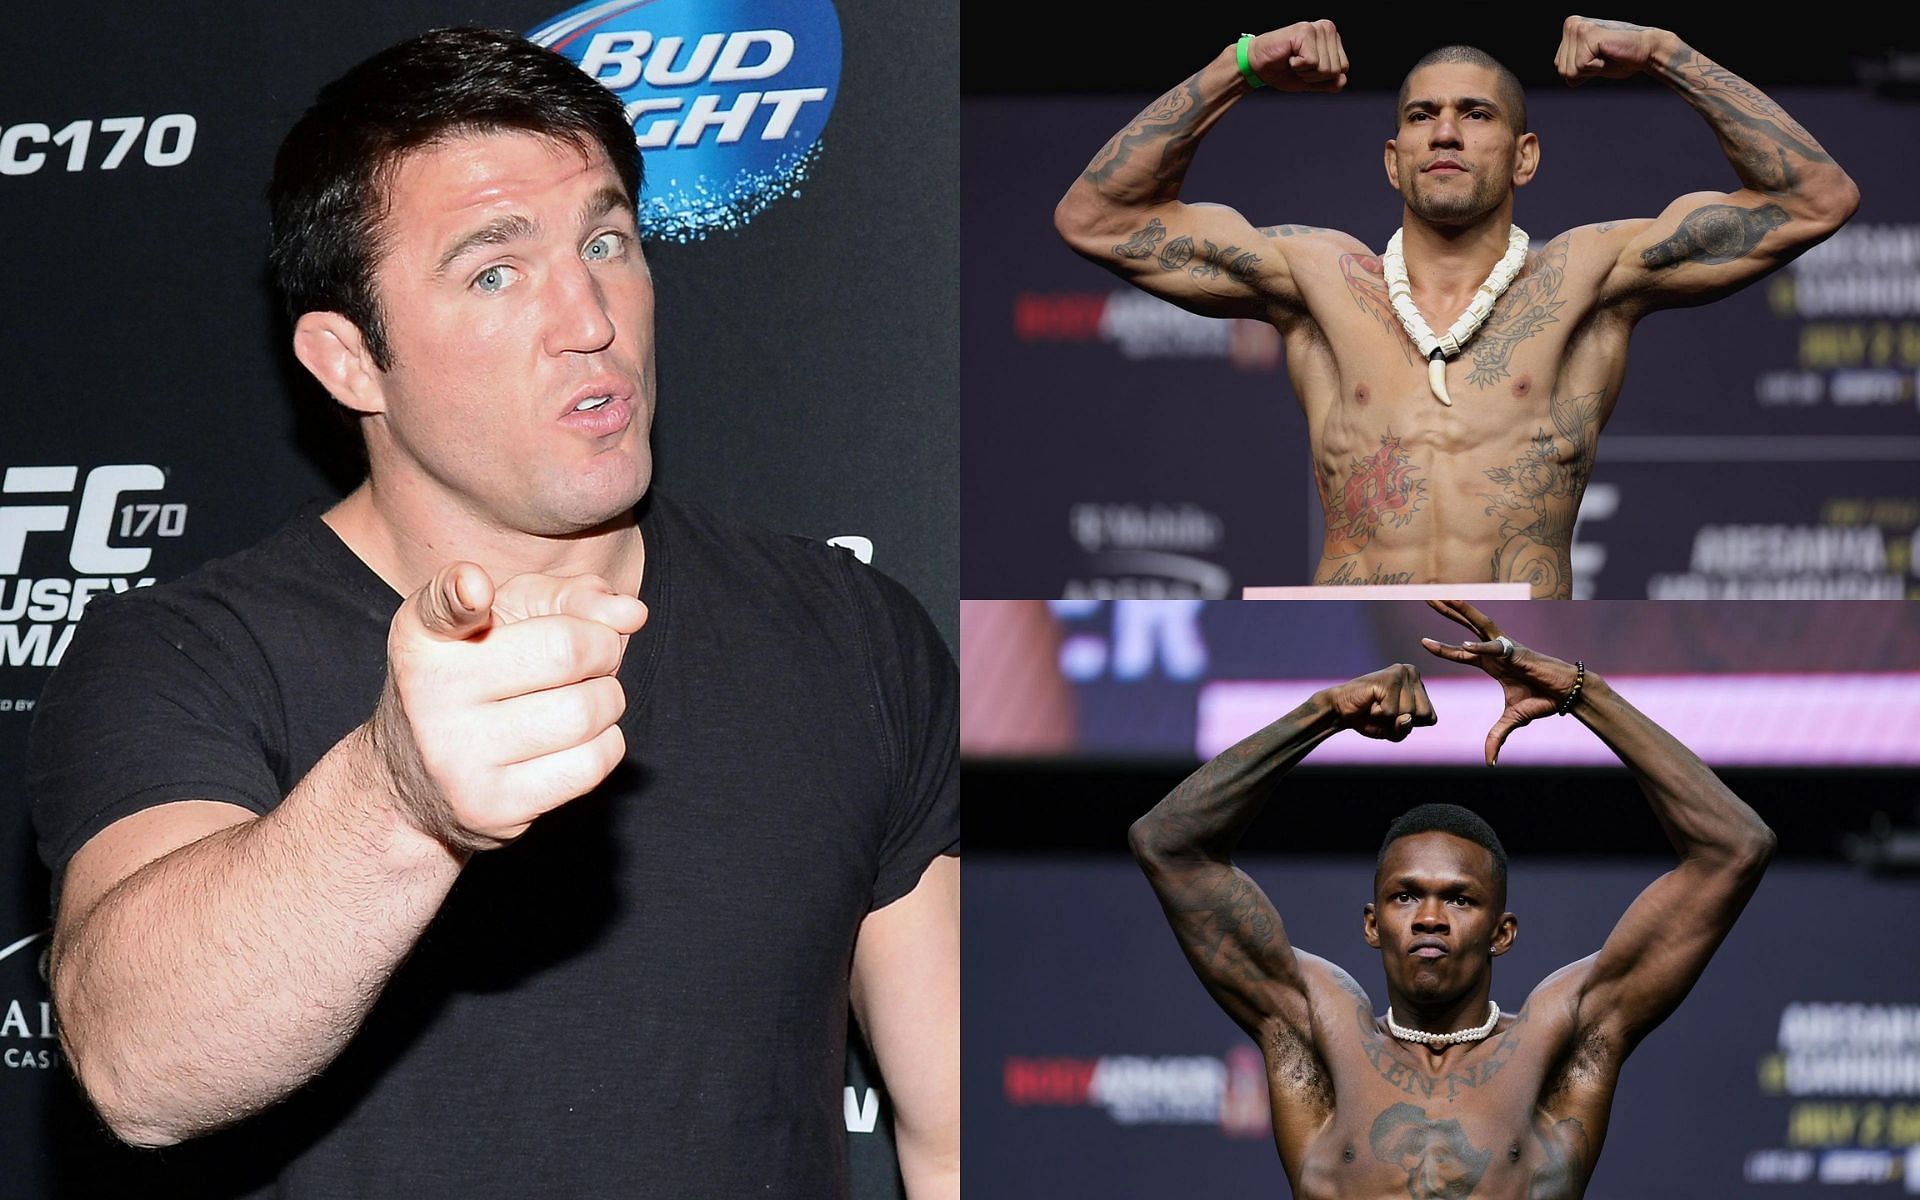 Chael Sonnen (Left), Israel Adesanya (Bottom Right), and Alex Pereira (Top Right) (Images courtesy of Getty)